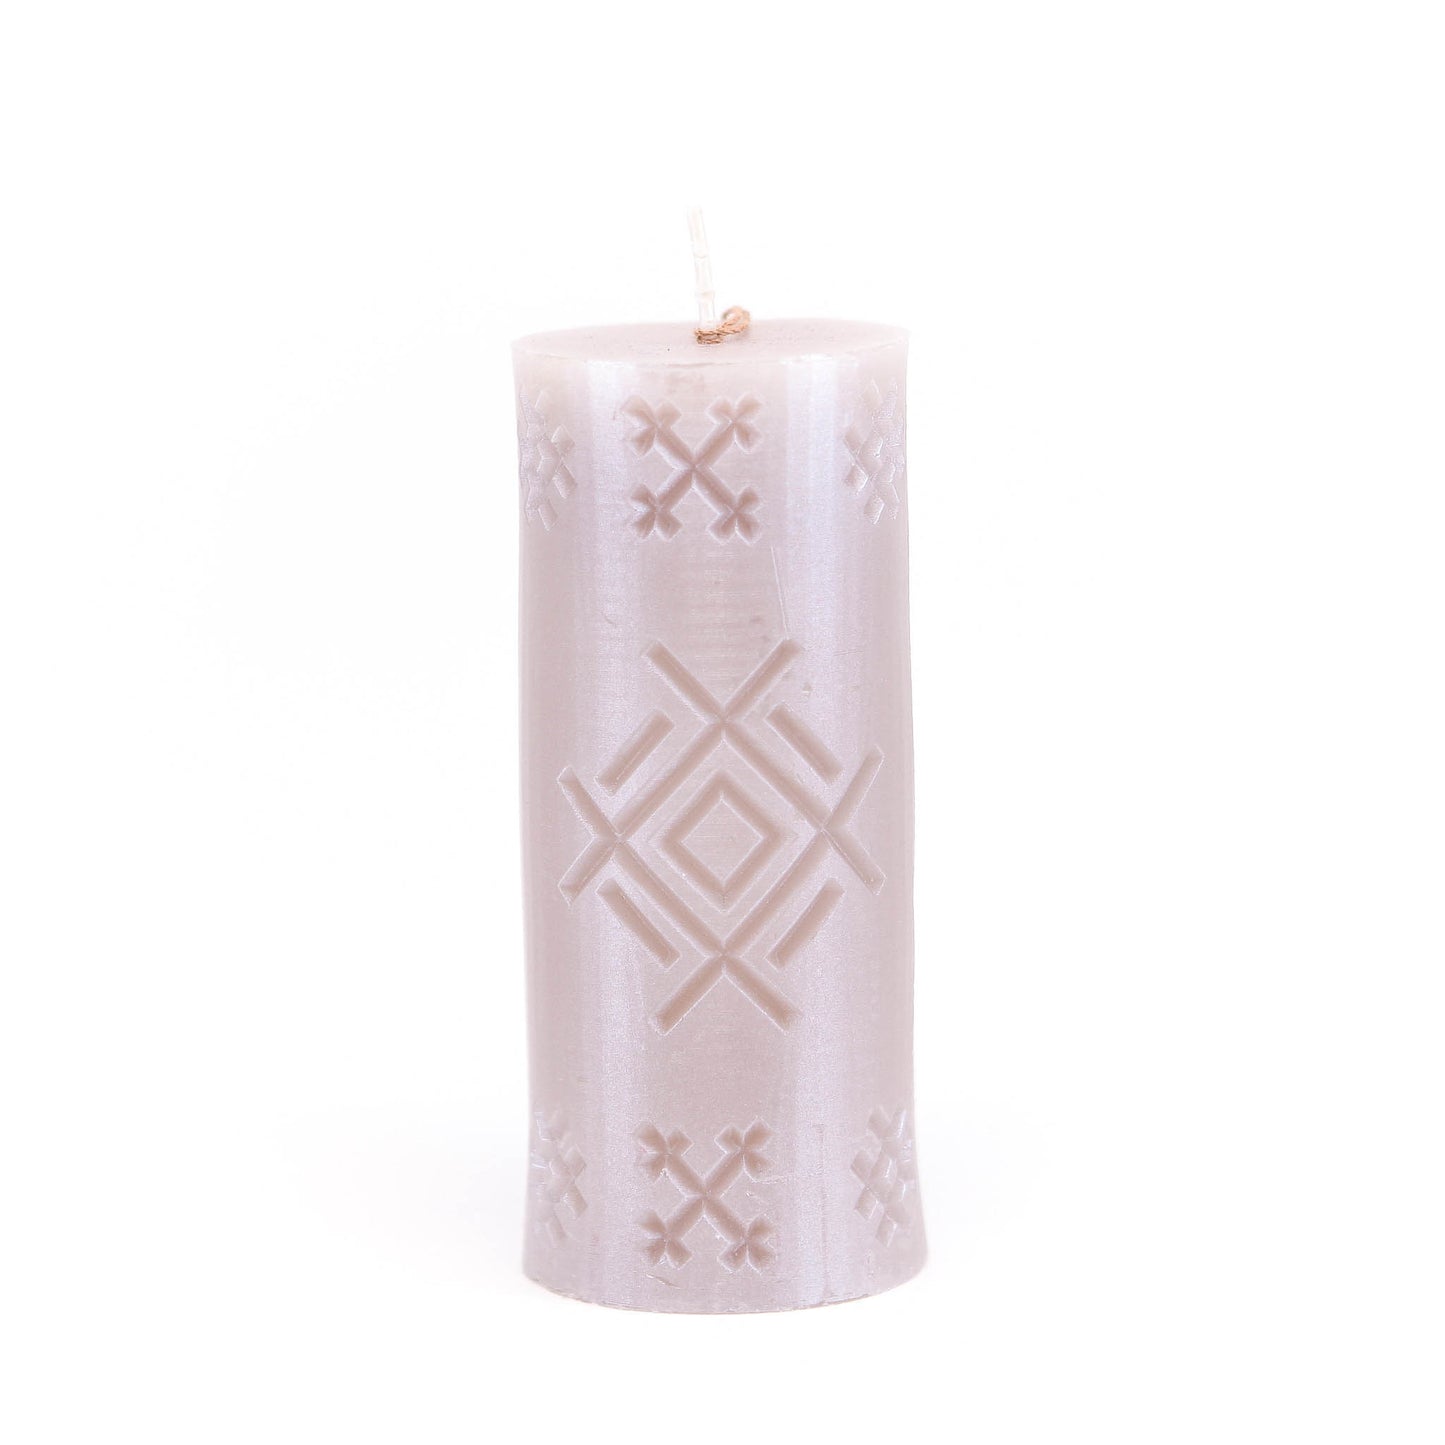 Candle with Latvian rune "Well", silver